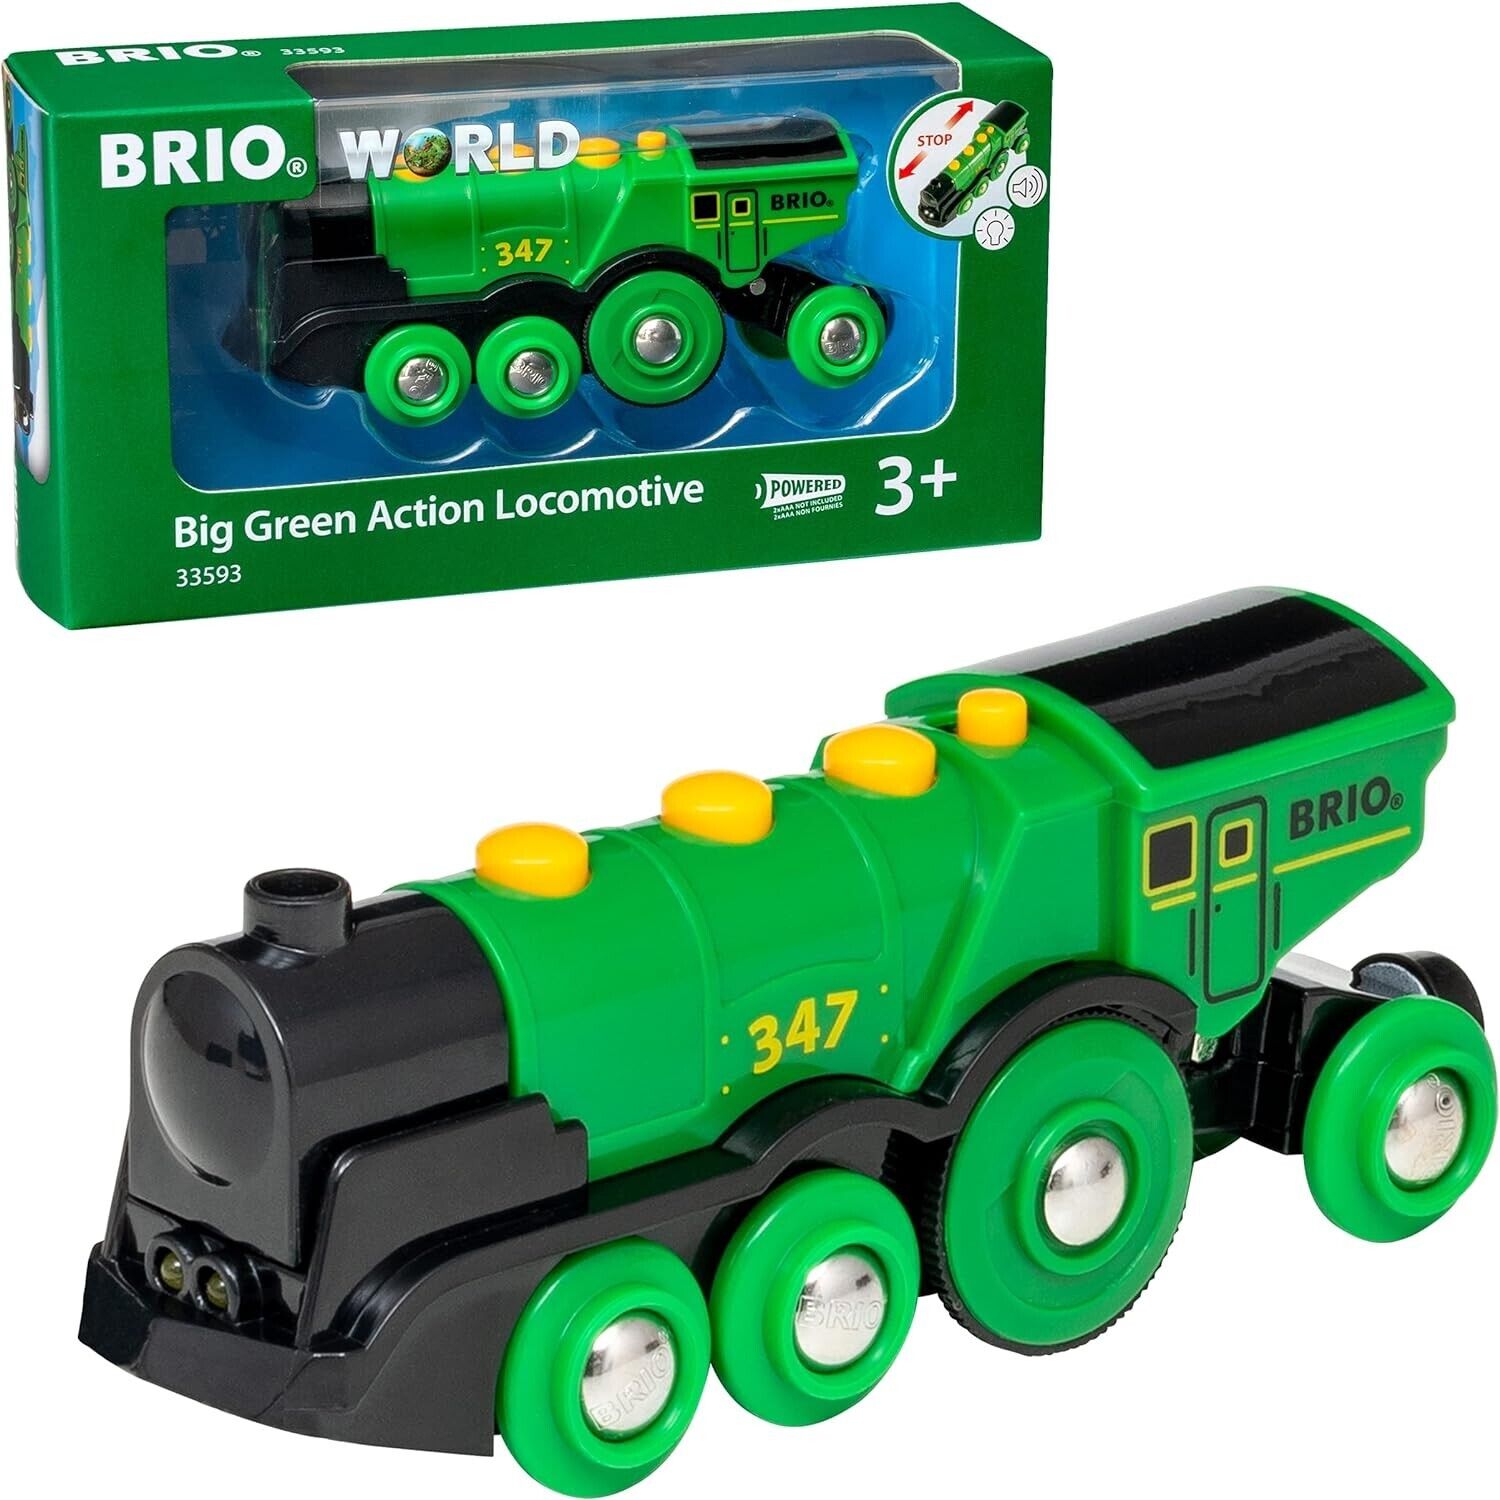 BRIO Big Green Locomotive Battery Powered Toy Train for Kids Age 3 Years Up - Ra